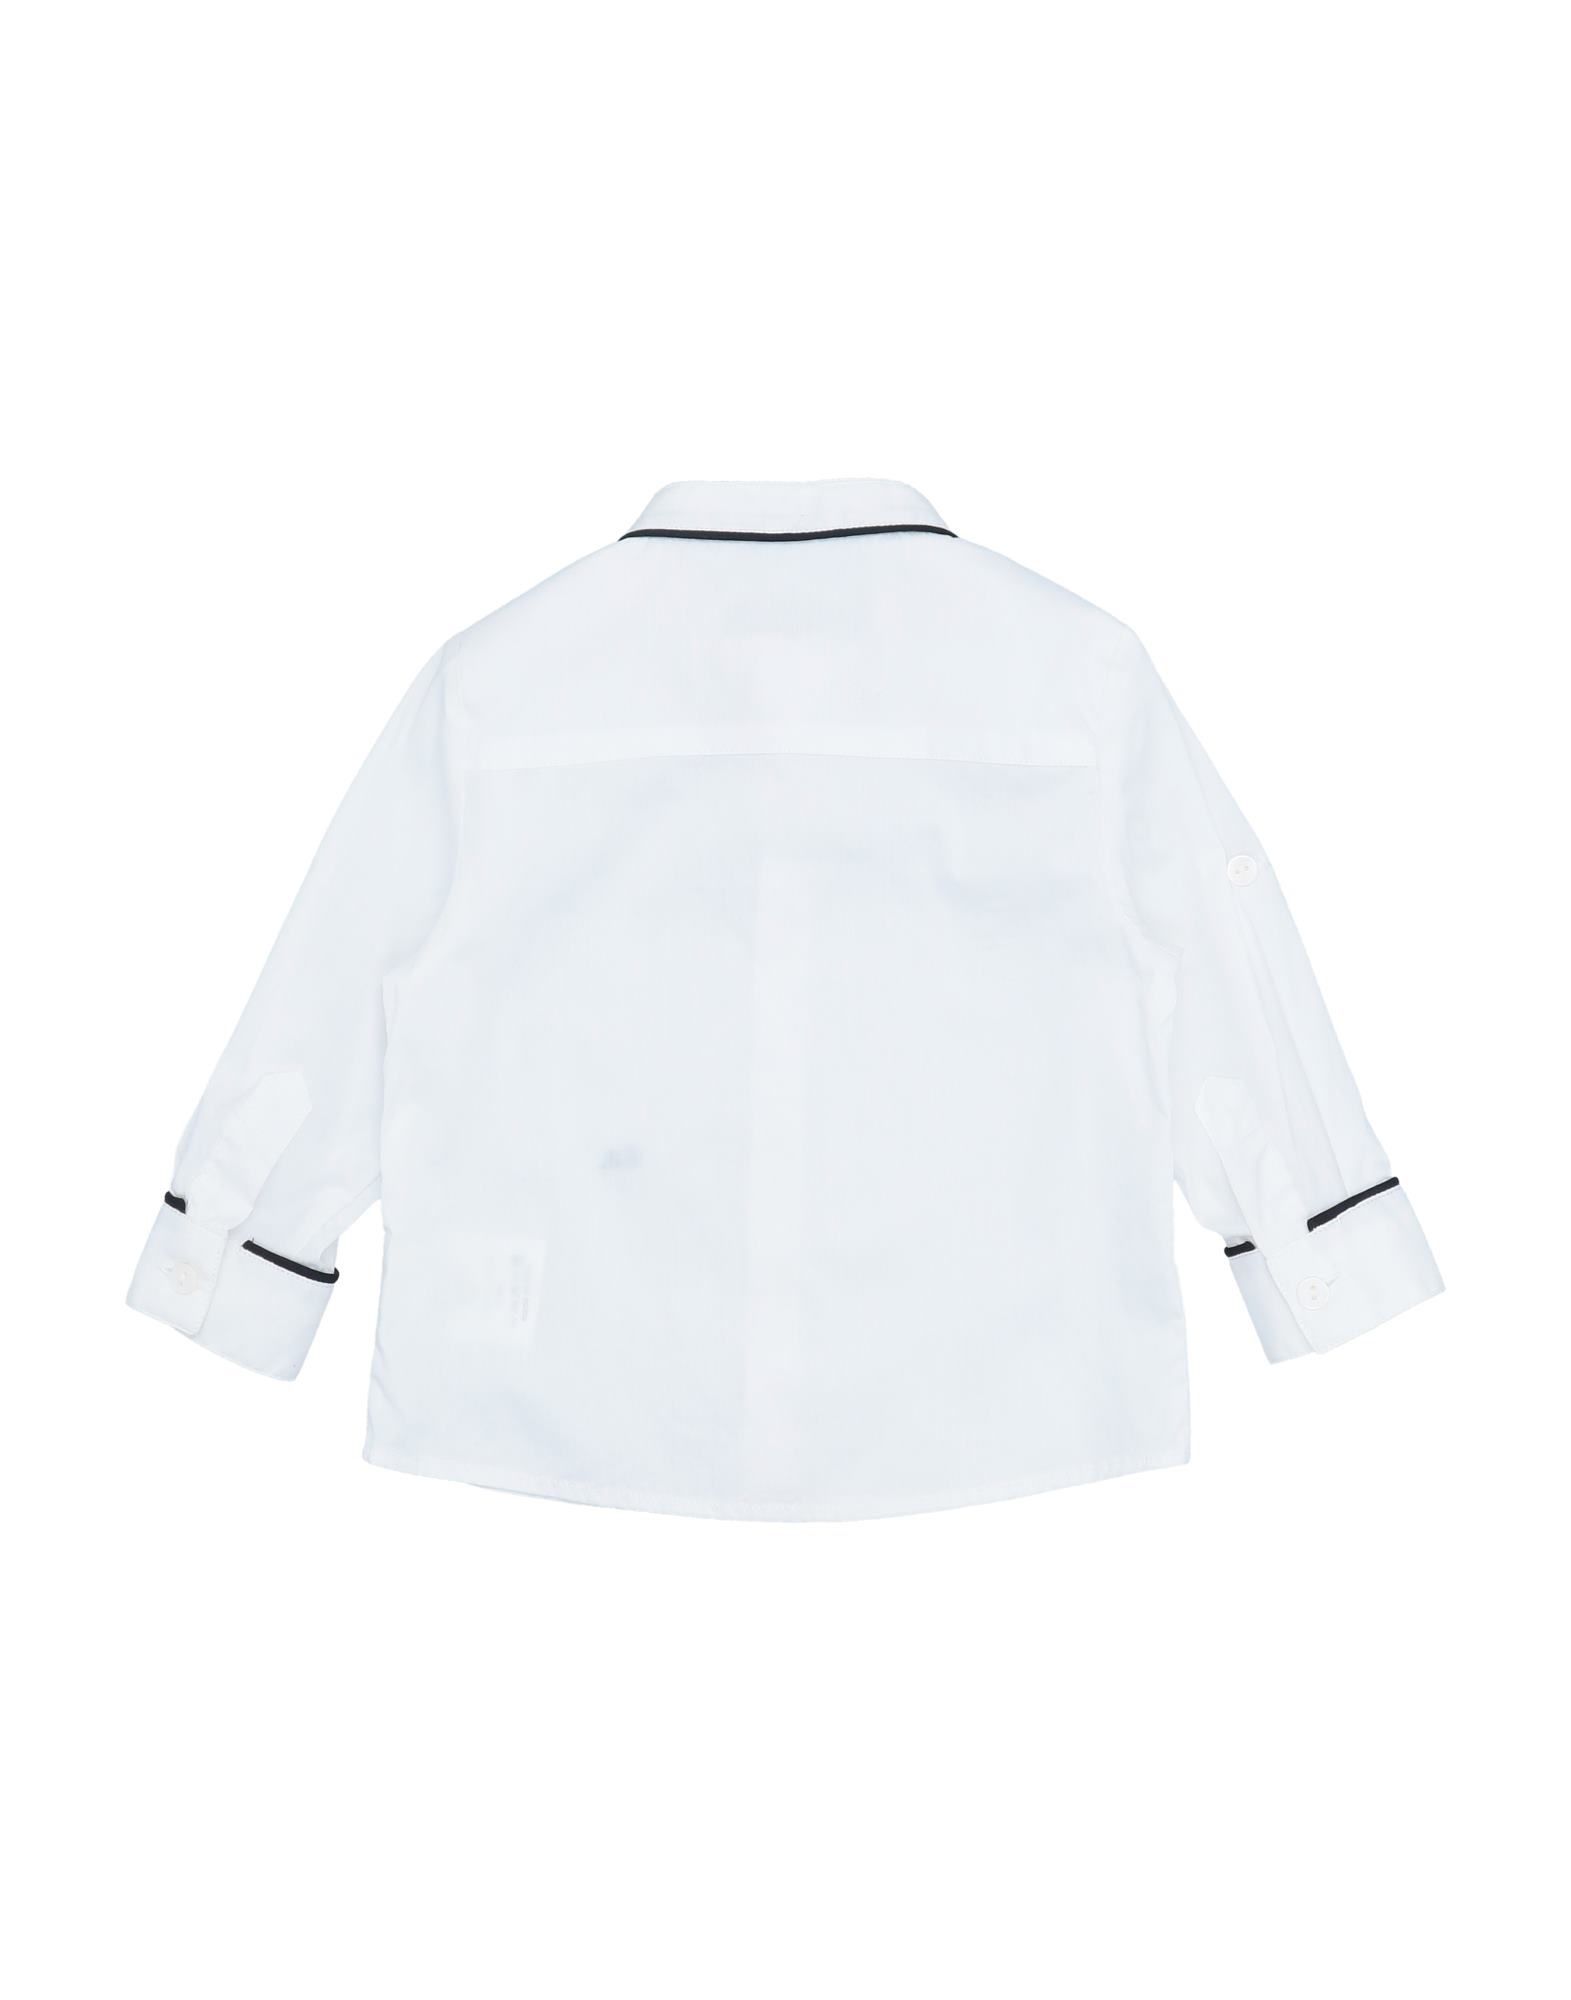 poplin, logo, detachable application, solid colour, front closure, button closing, long sleeves, buttoned cuffs, mandarin collar, no pockets, wash at 30° c, dry cleanable, iron at 110° c max, do not bleach, do not tumble dry, stretch, small sized